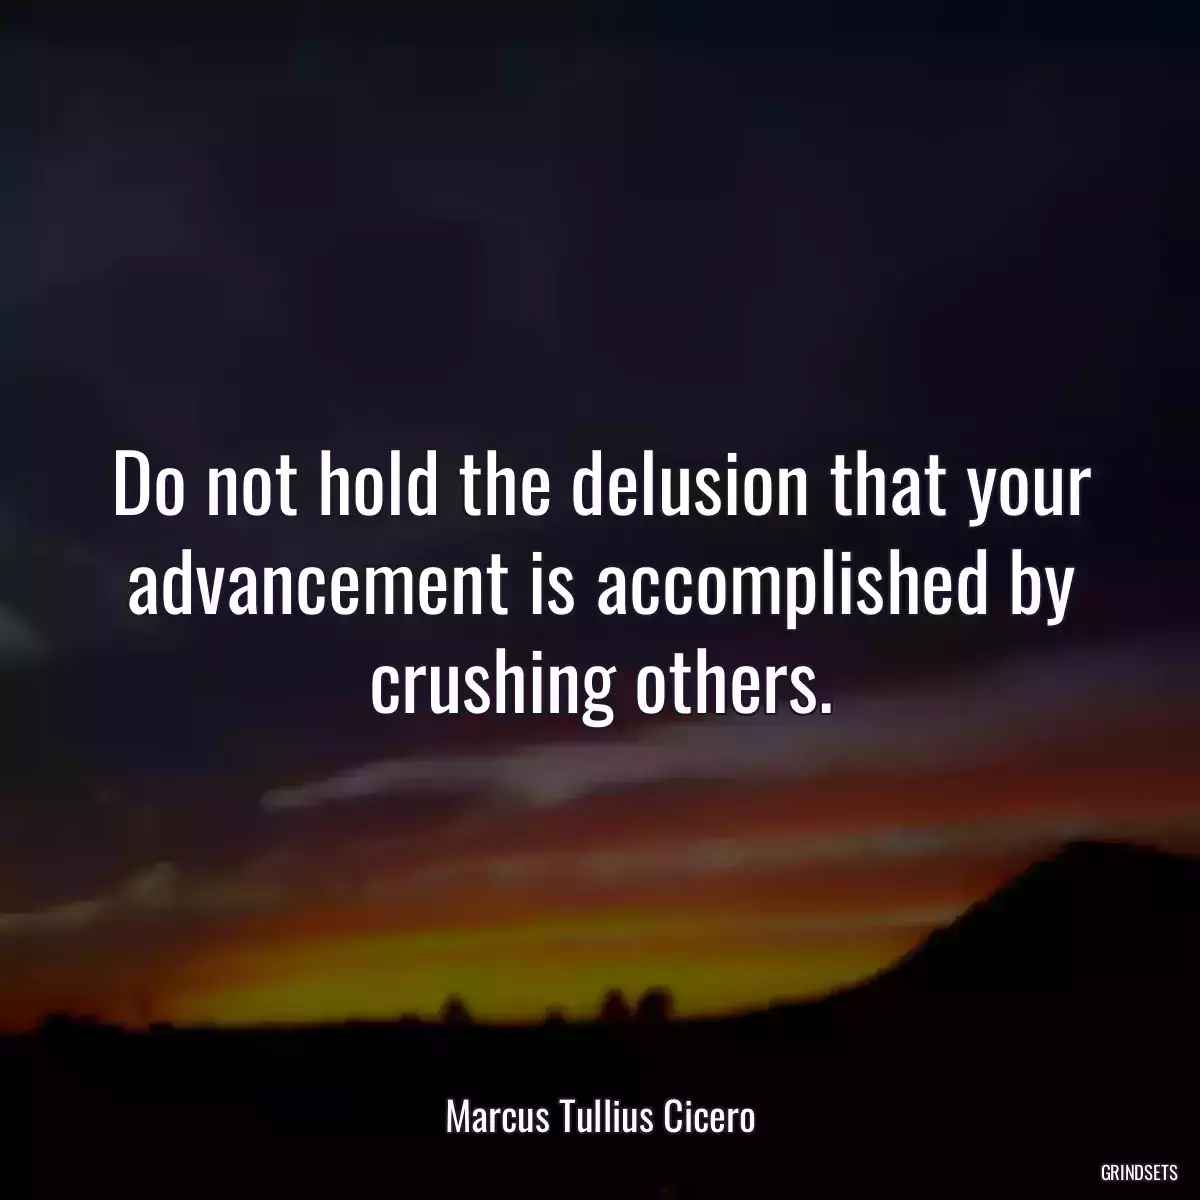 Do not hold the delusion that your advancement is accomplished by crushing others.